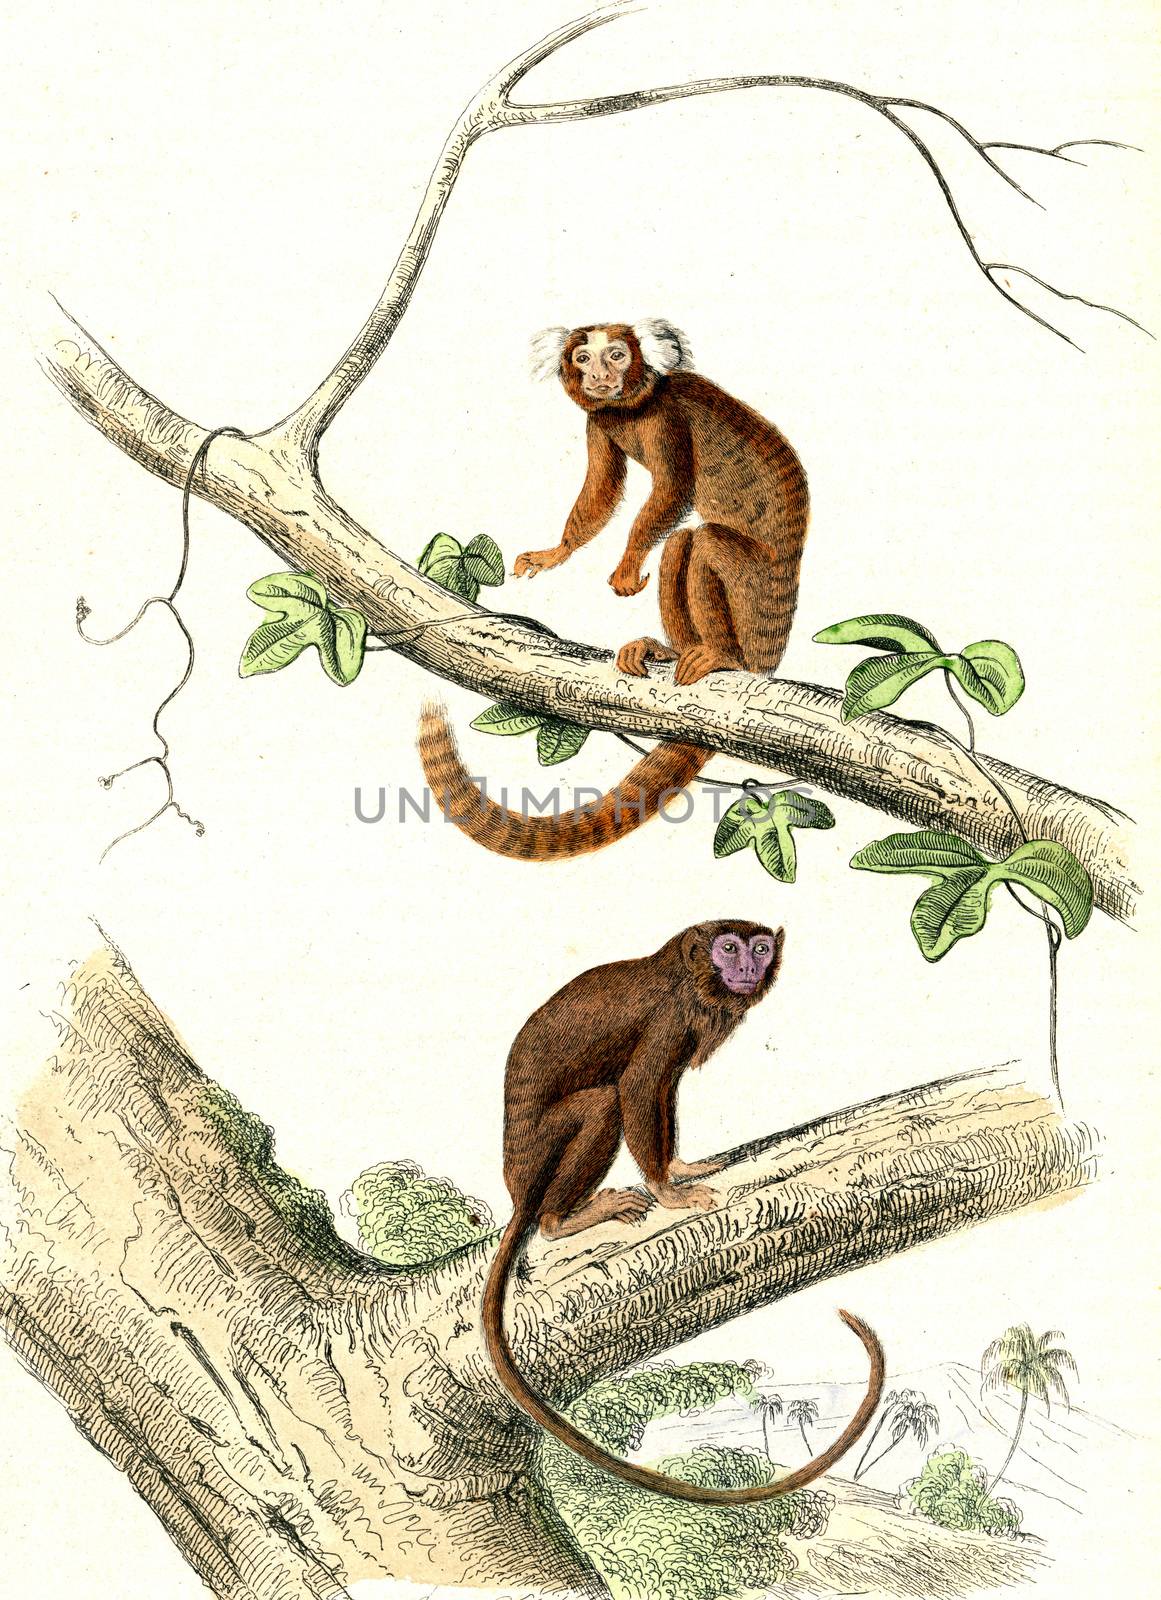 The Marmoset, The Tamarin, vintage engraving. by Morphart